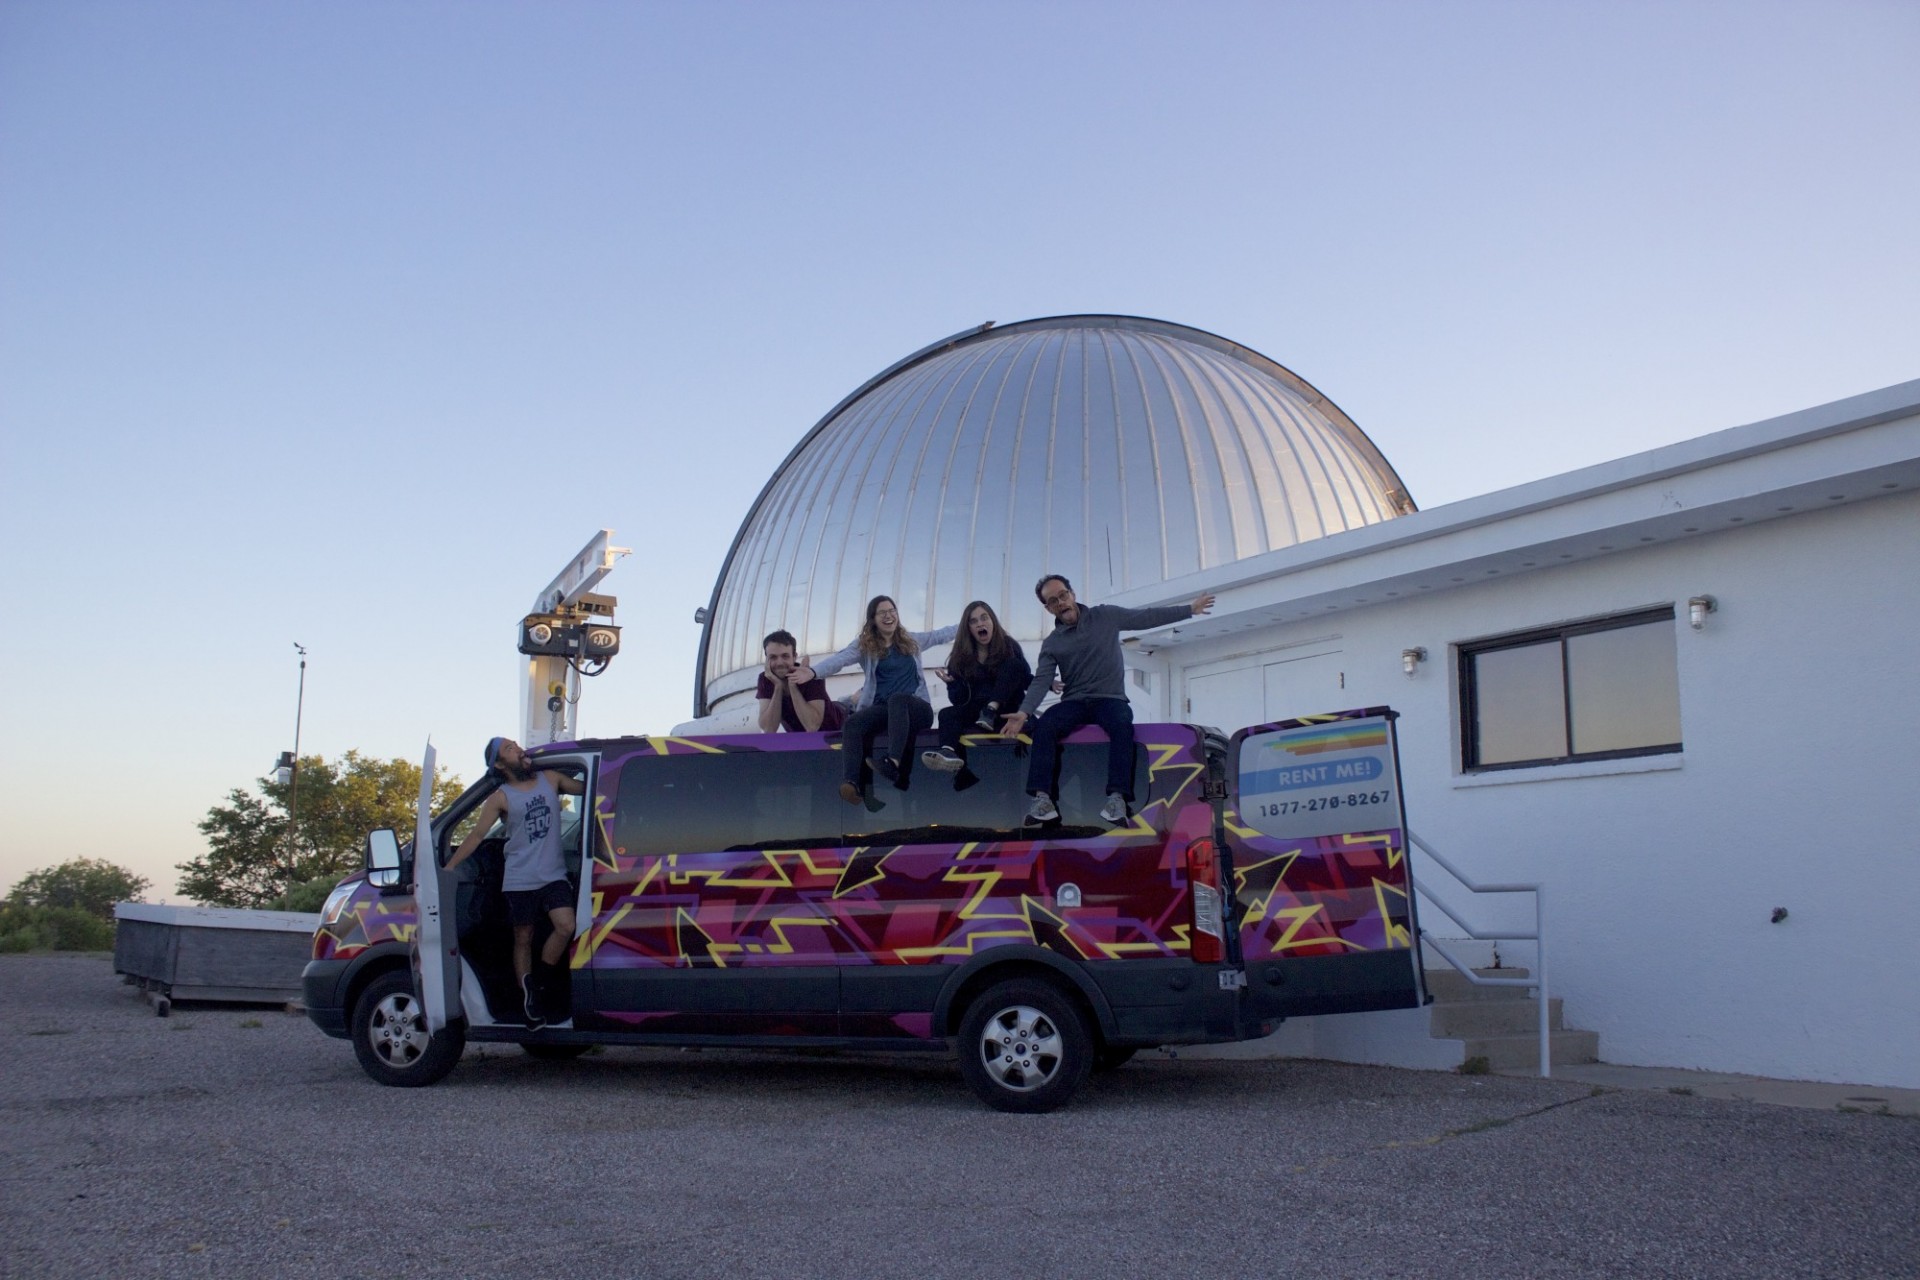 Group members on top of a multicolored van in front of the MDM 2.4 m telescope.